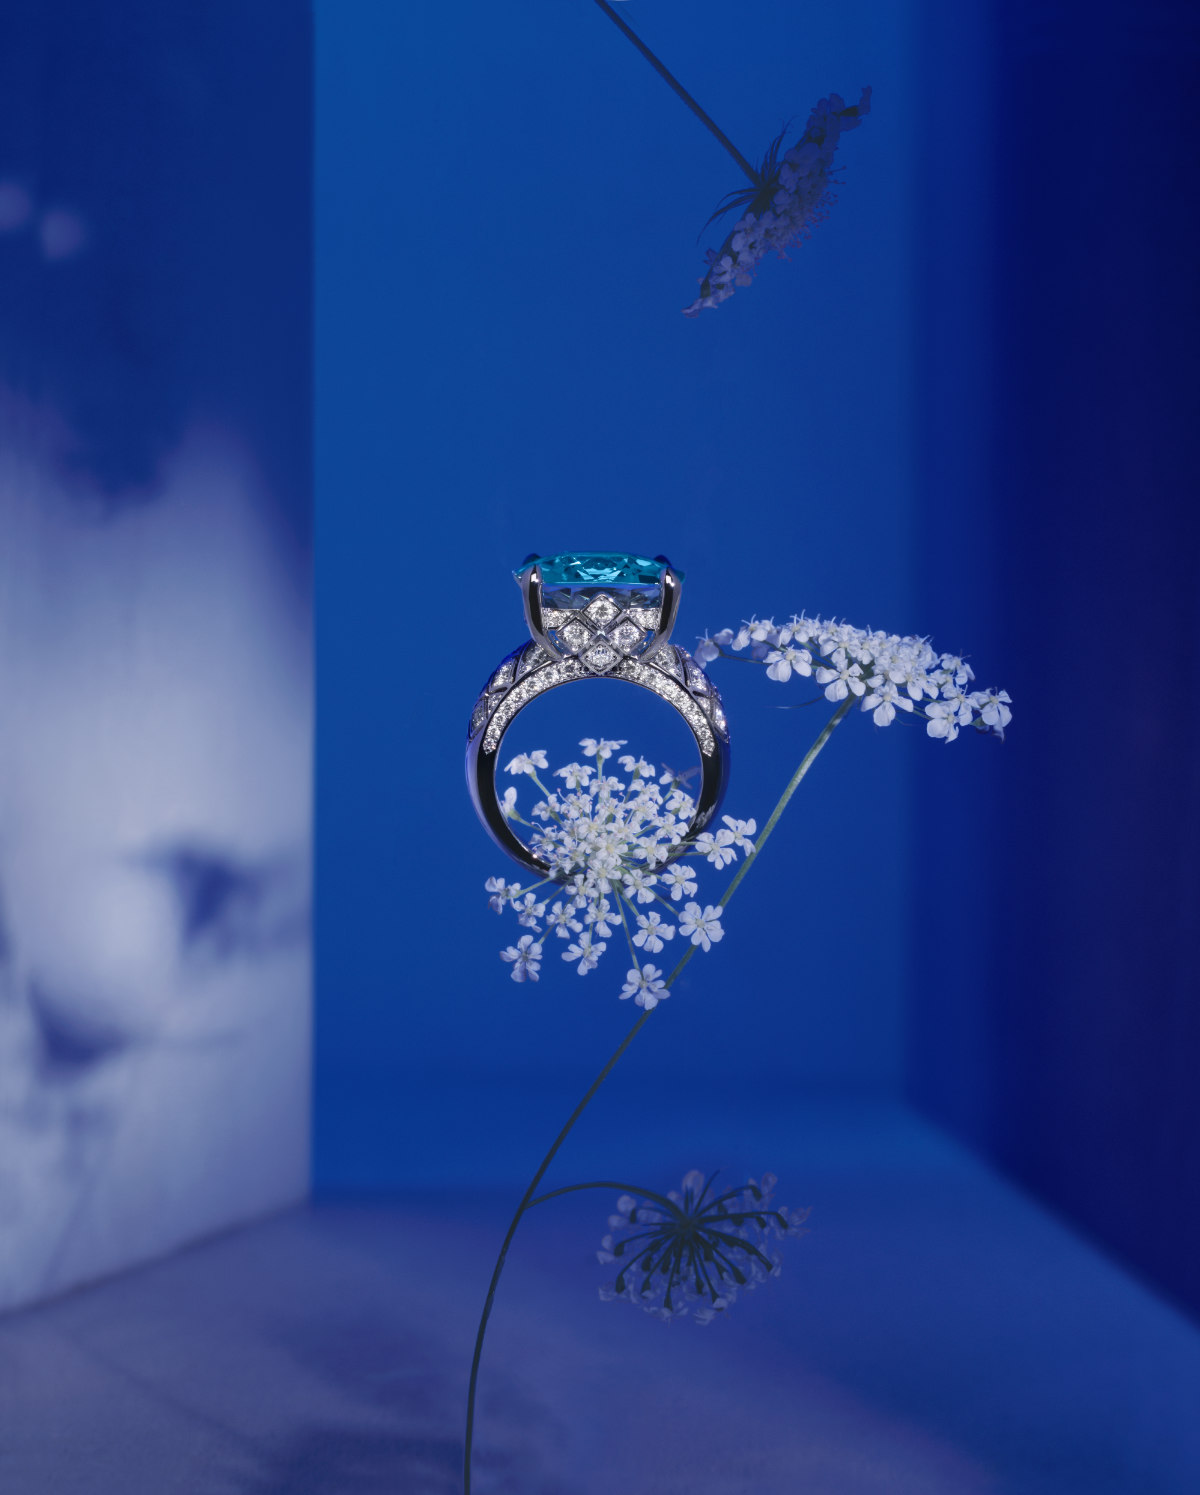 Piaget Presents Its New High Jewellery Collection: Metaphoria